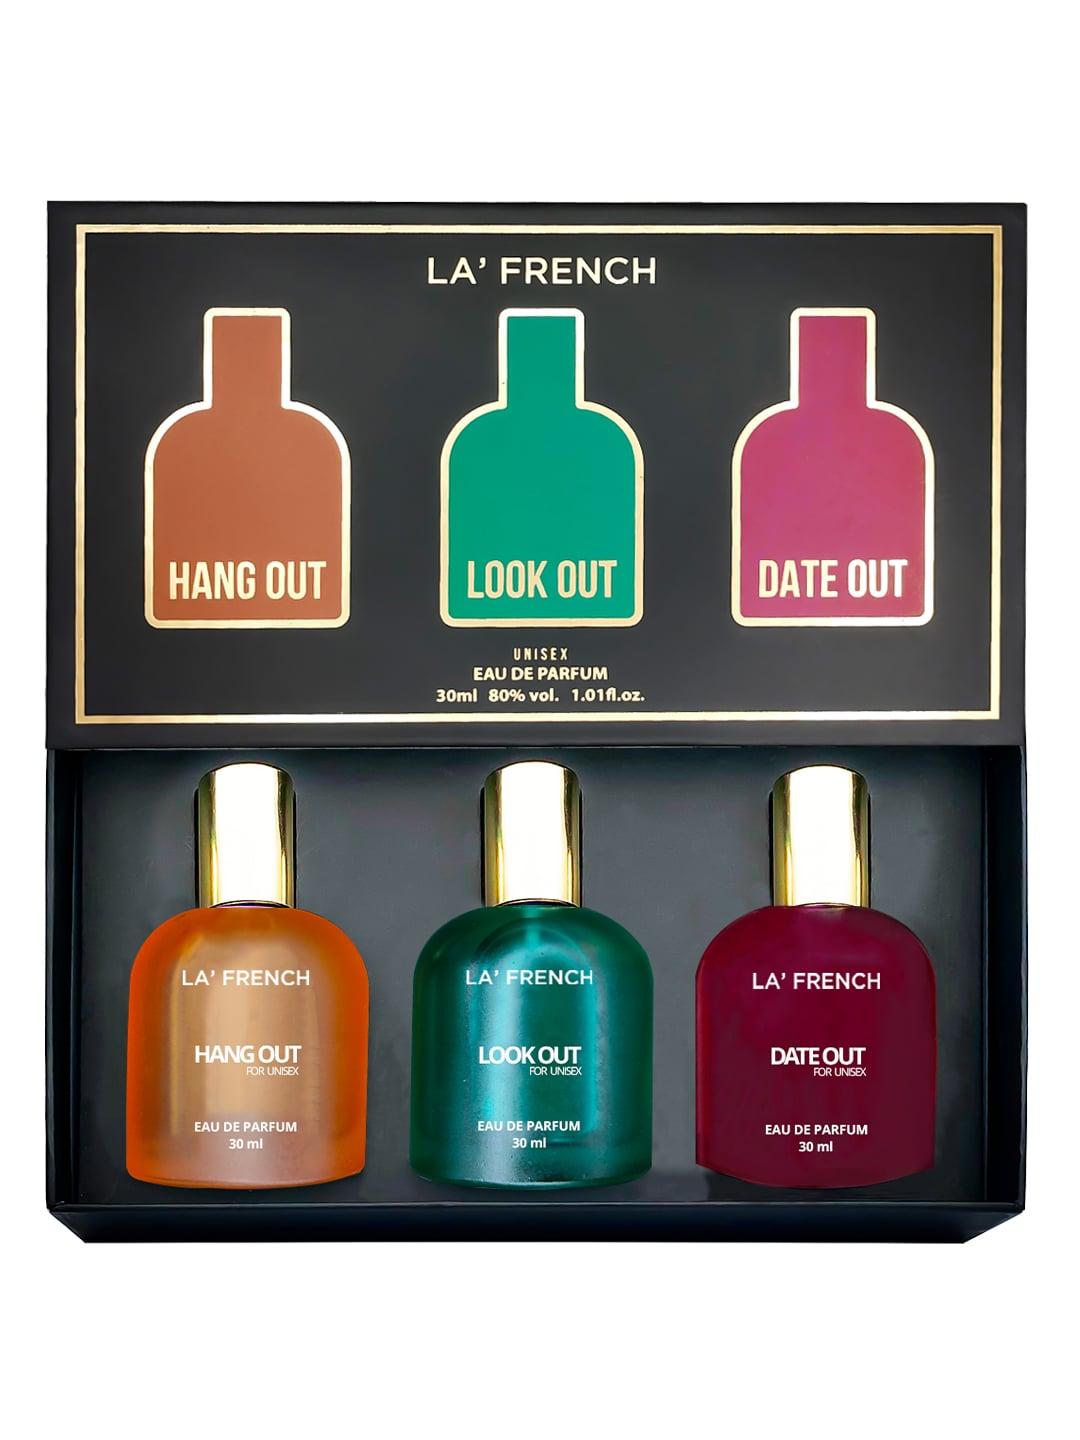 La French Date Series Set Of 3 EDP Perfume -Hangout-LookOut-Dateout - 30ml  Each